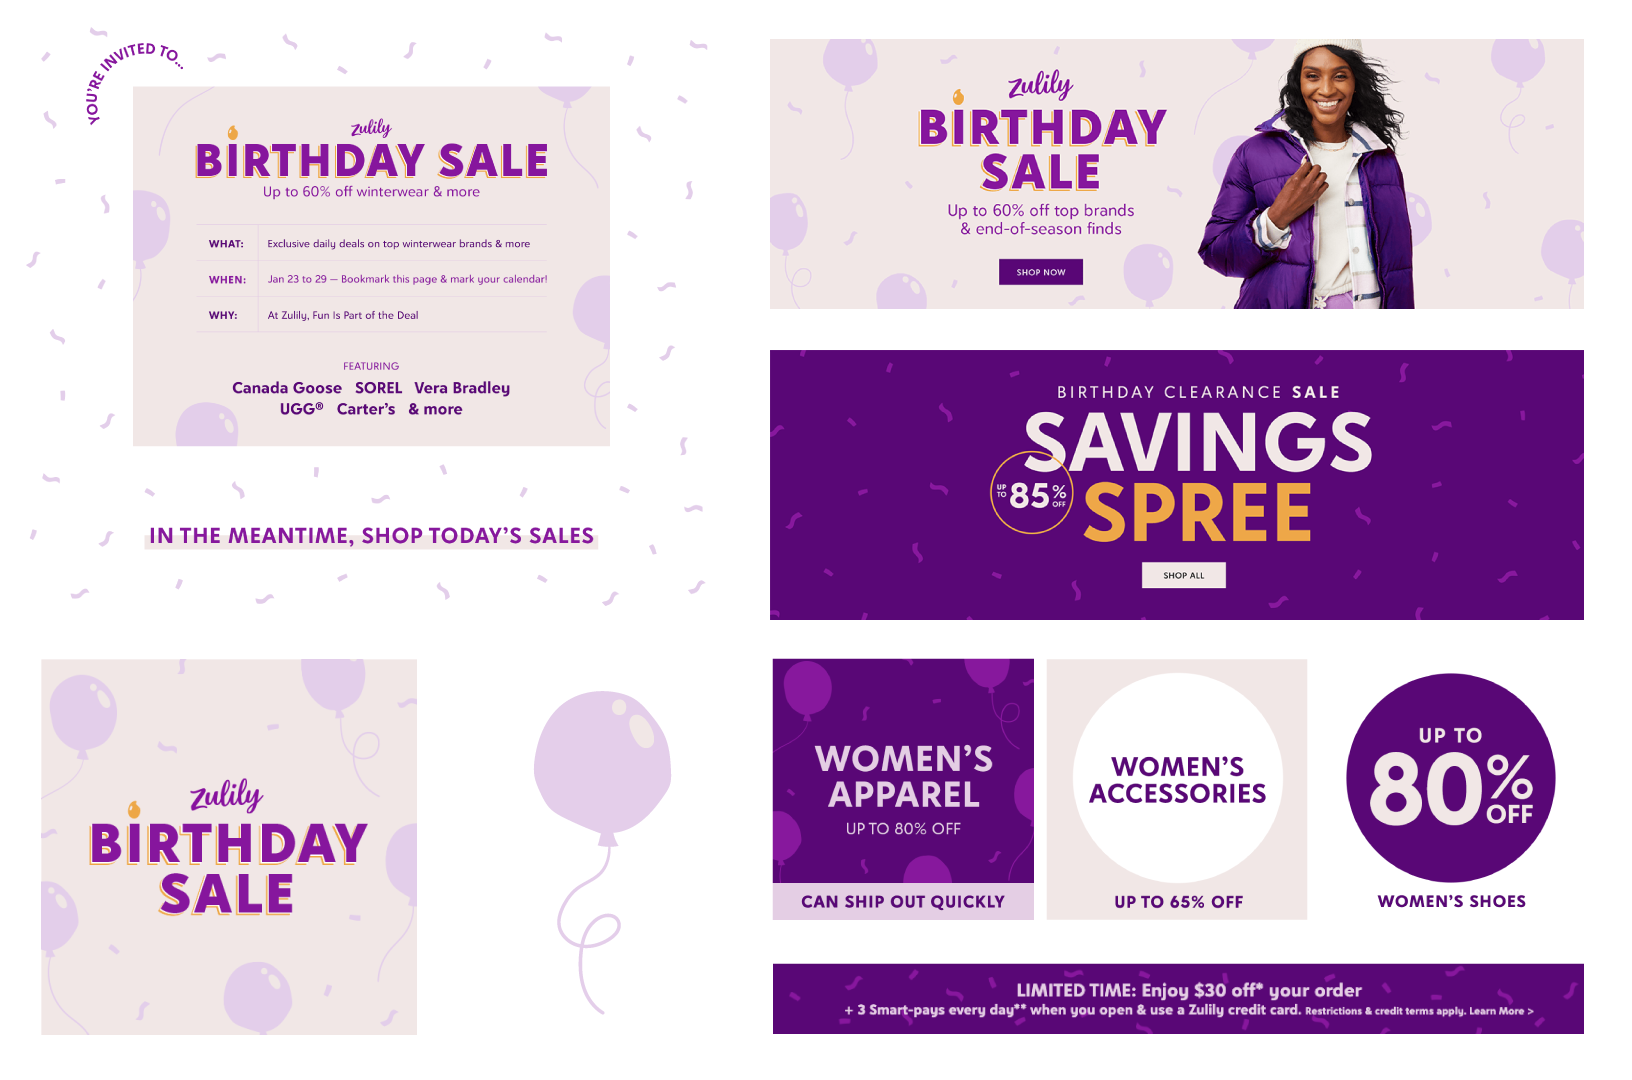 zulily birthday campaign assets